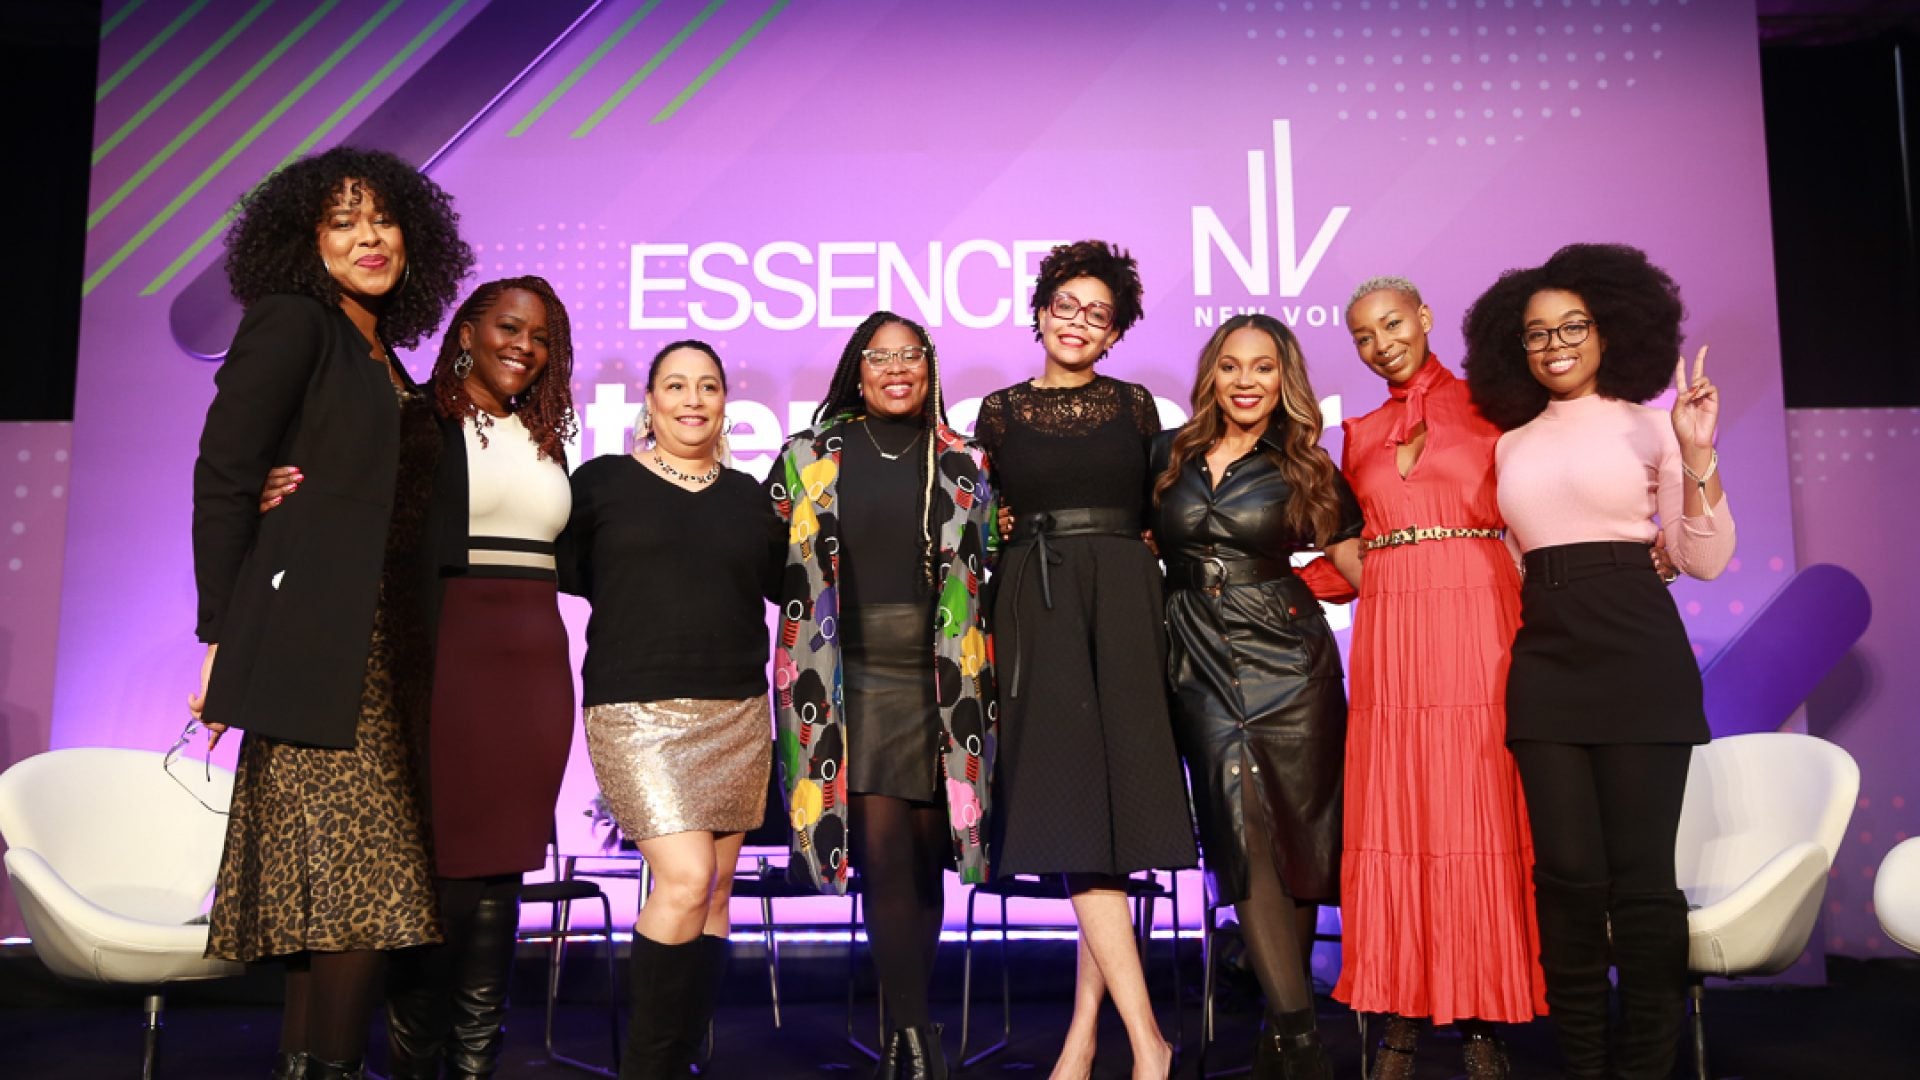 Meet Seven Black Women Entrepreneurs Who Run Successful Businesses You Need To Know About